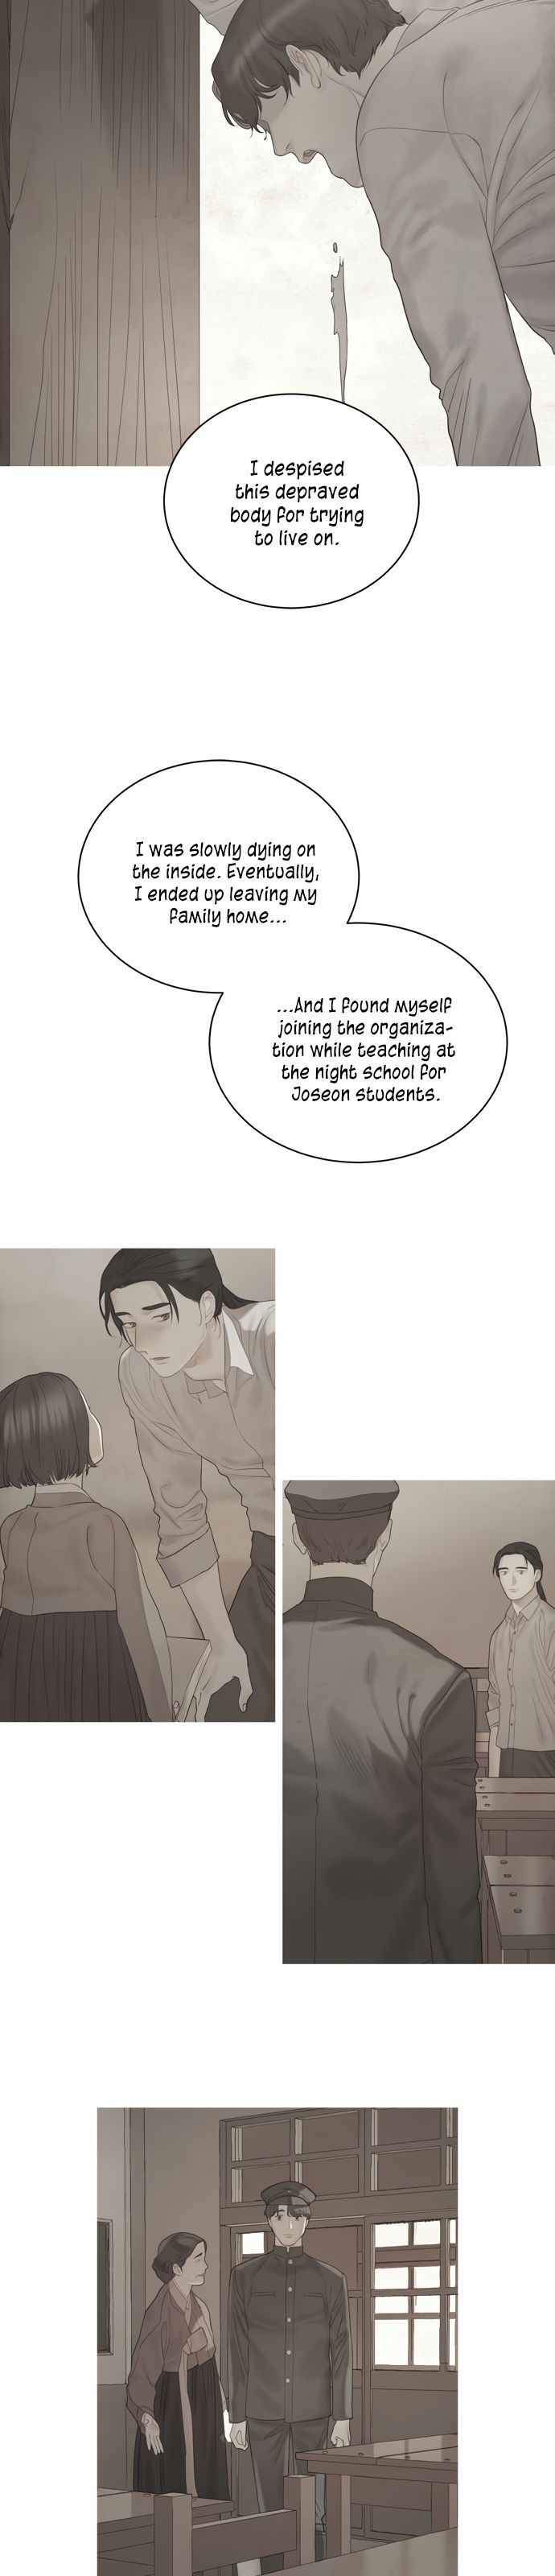 Gorae Byul - The Gyeongseong Mermaid - Chapter 23 Page 5